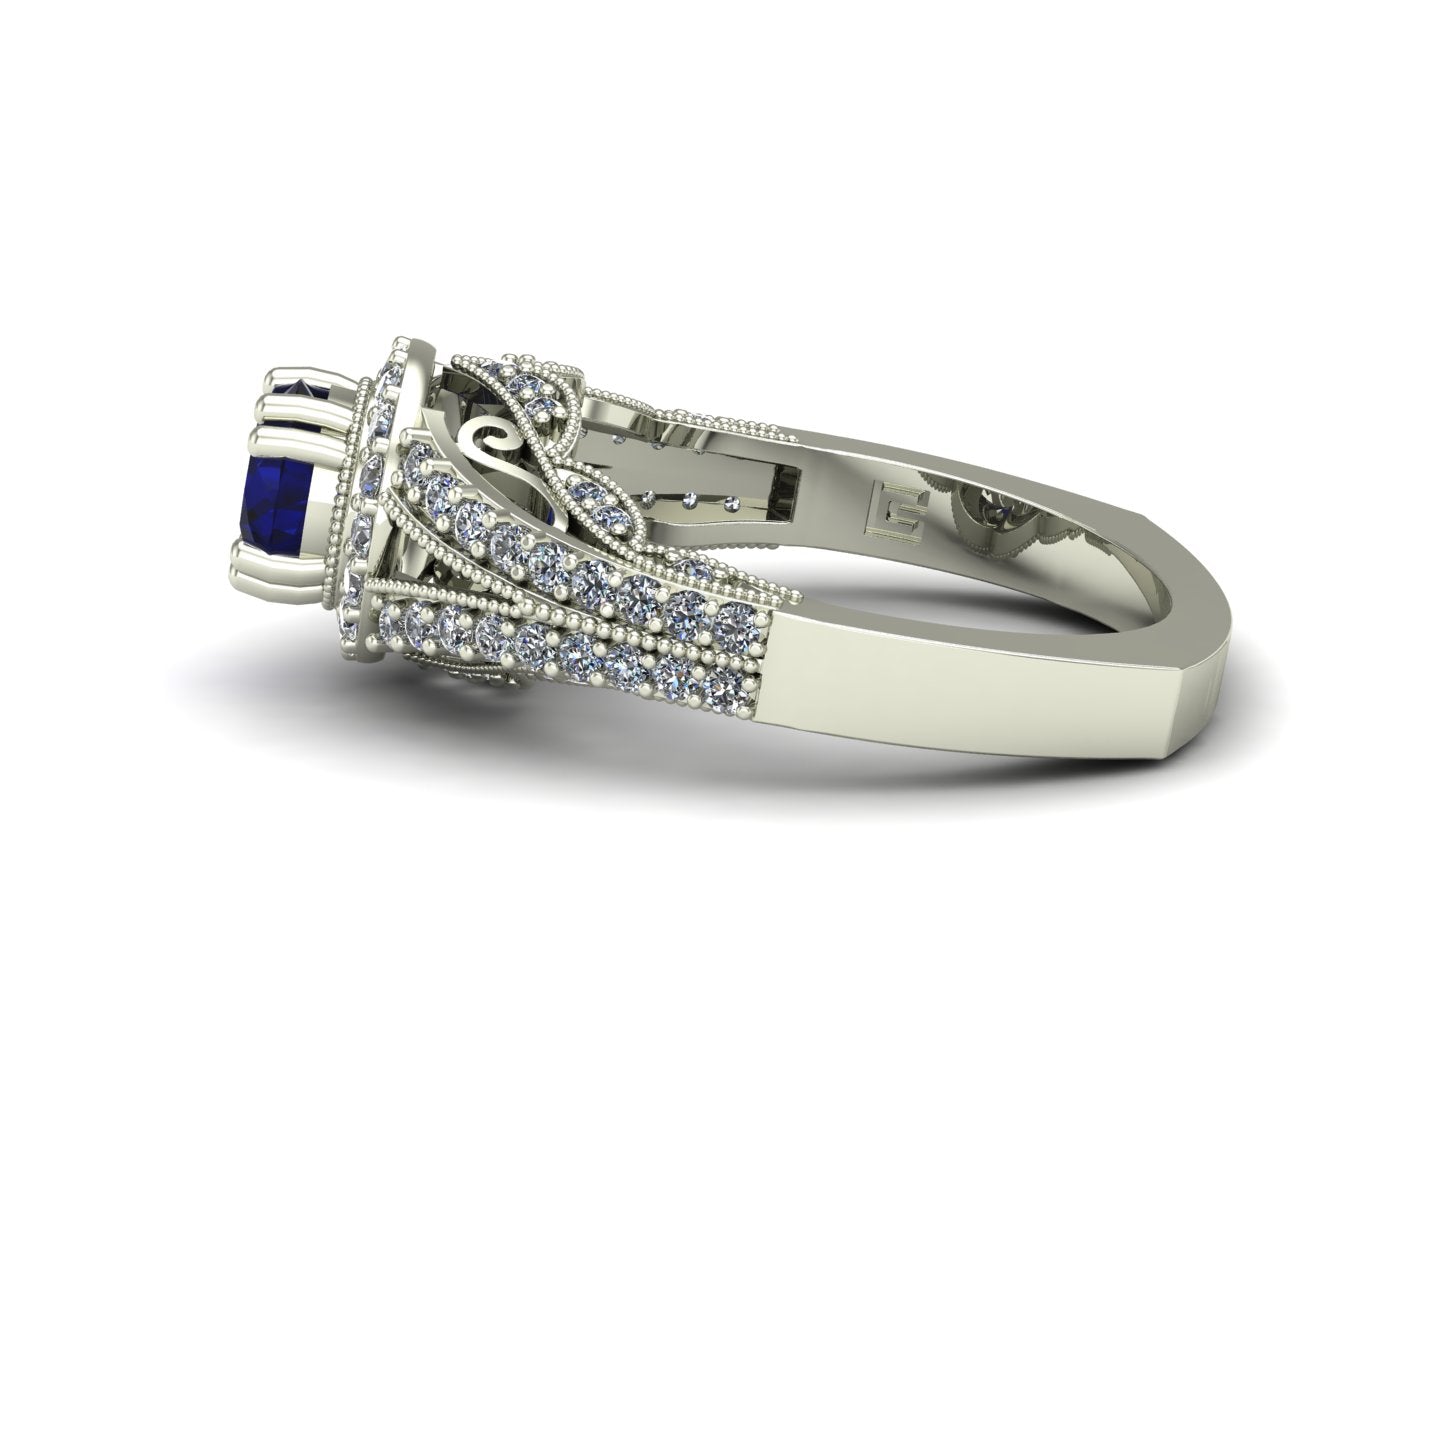 Blue sapphire and diamond scallop ring in 14k white gold - Charles Babb Designs - side view